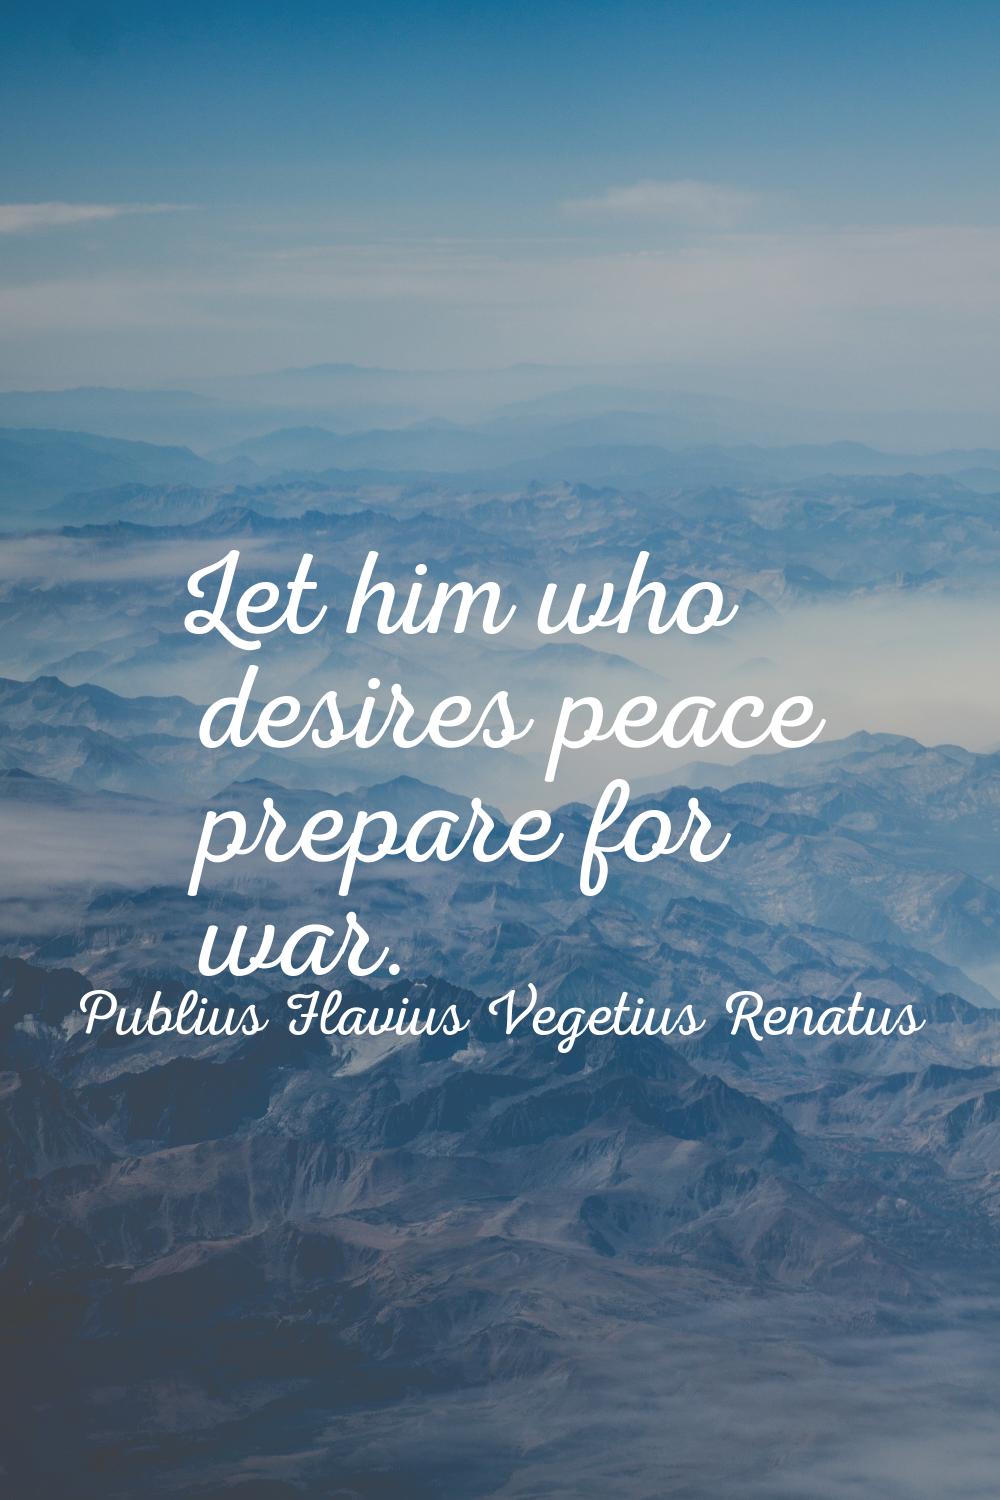 Let him who desires peace prepare for war.